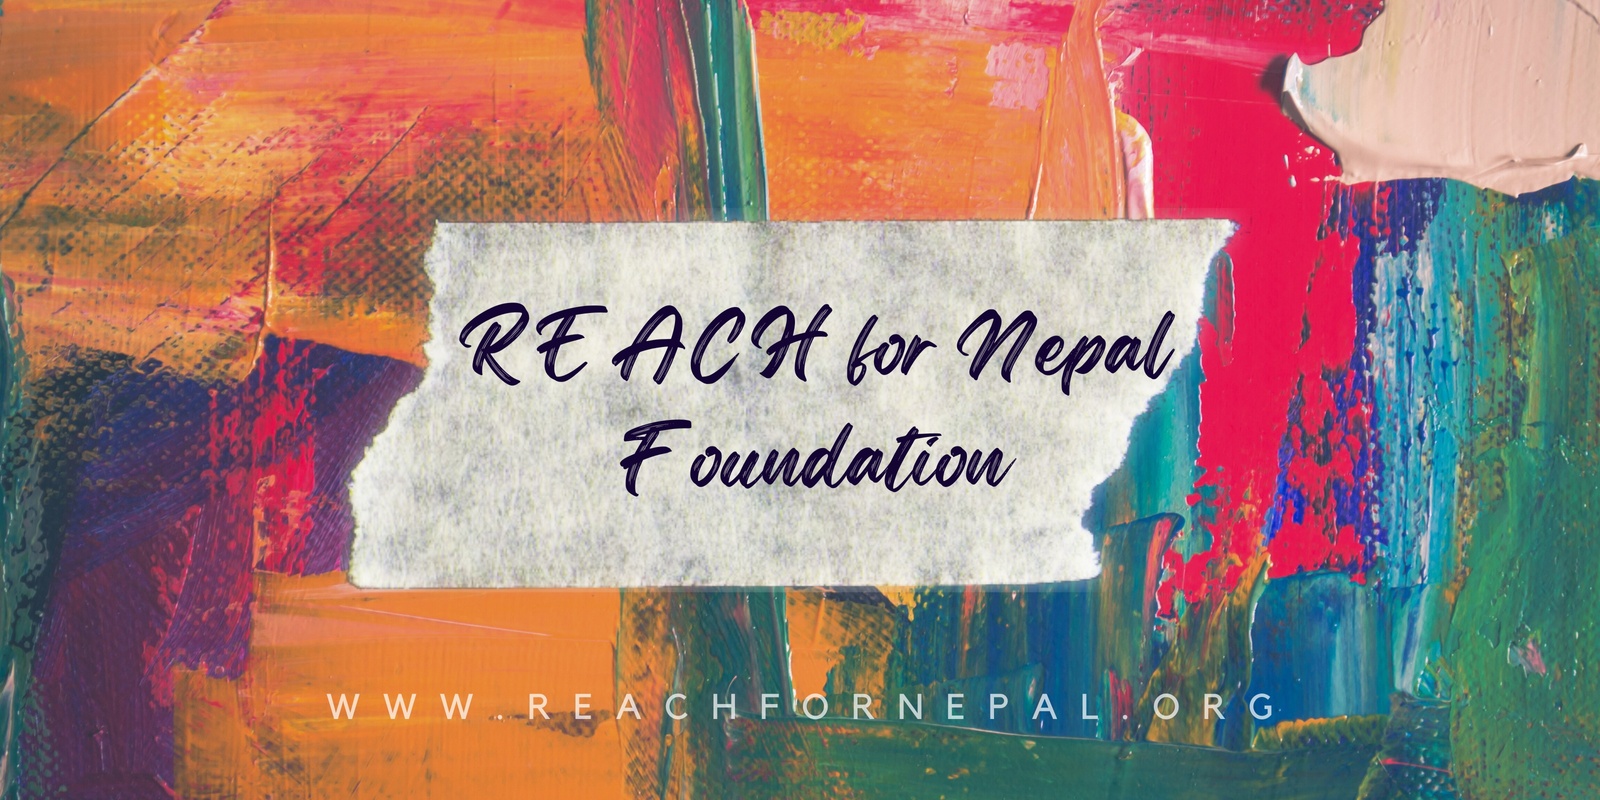 REACH for Nepal Foundation's banner